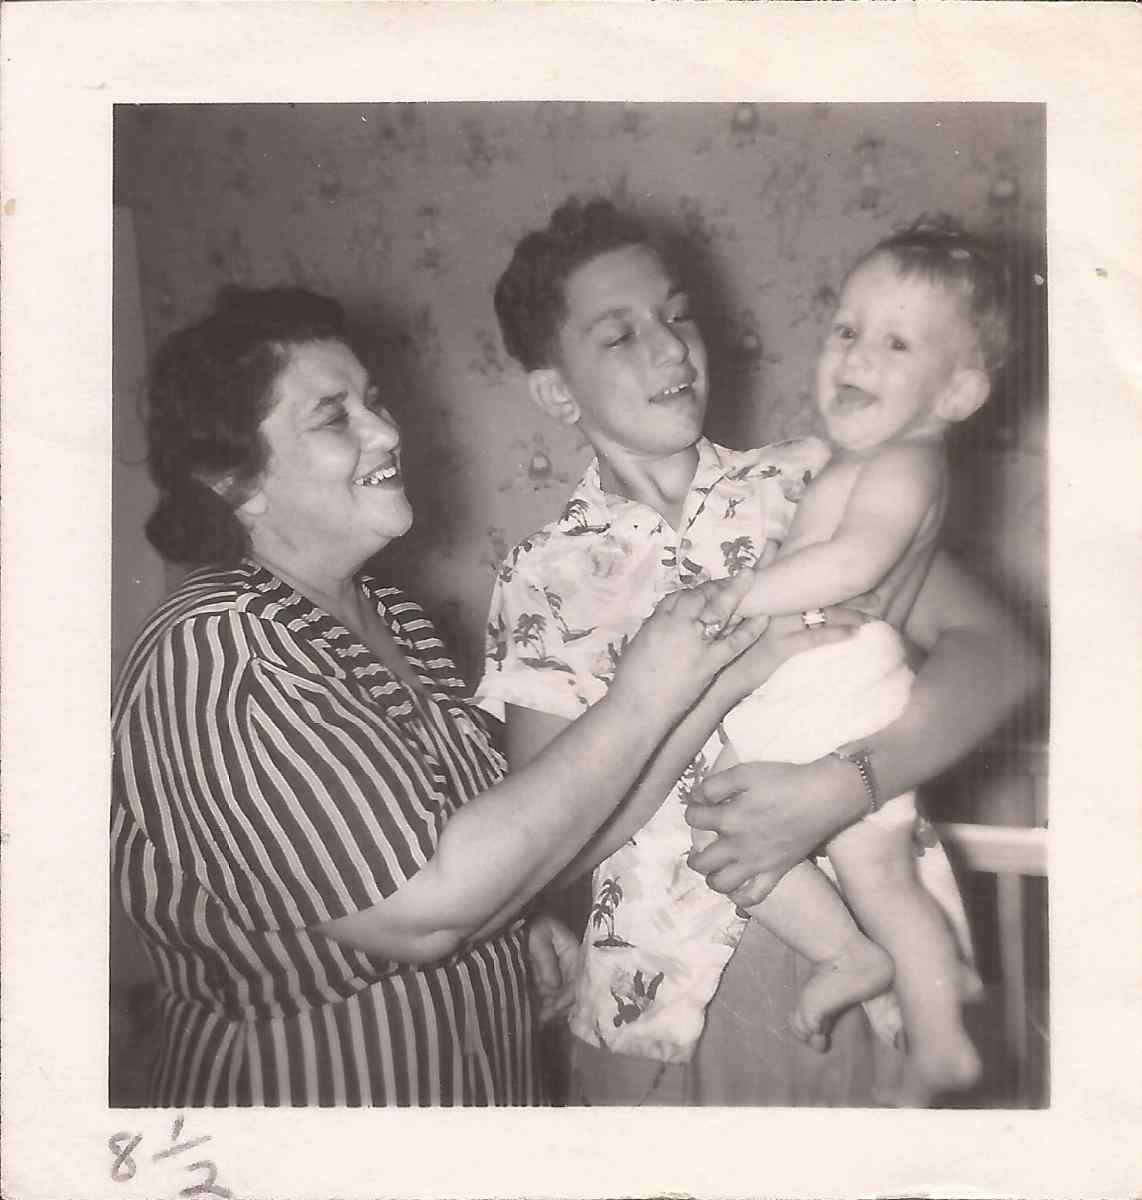 8 and a half months, Aug 1948